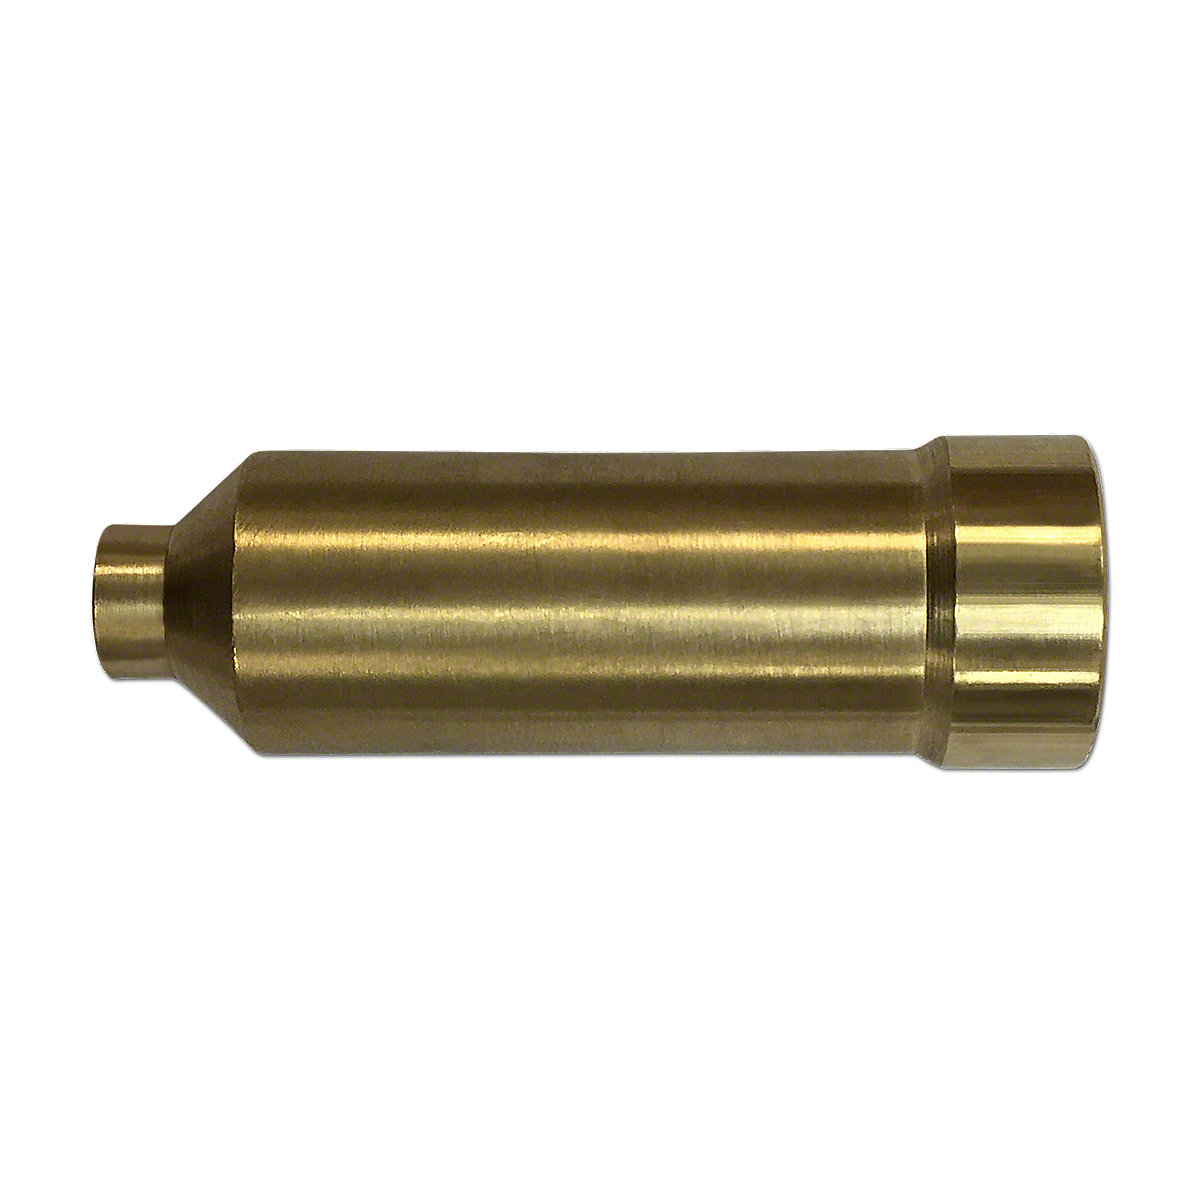 Fuel Injector Nozzle Holder (sleeve)